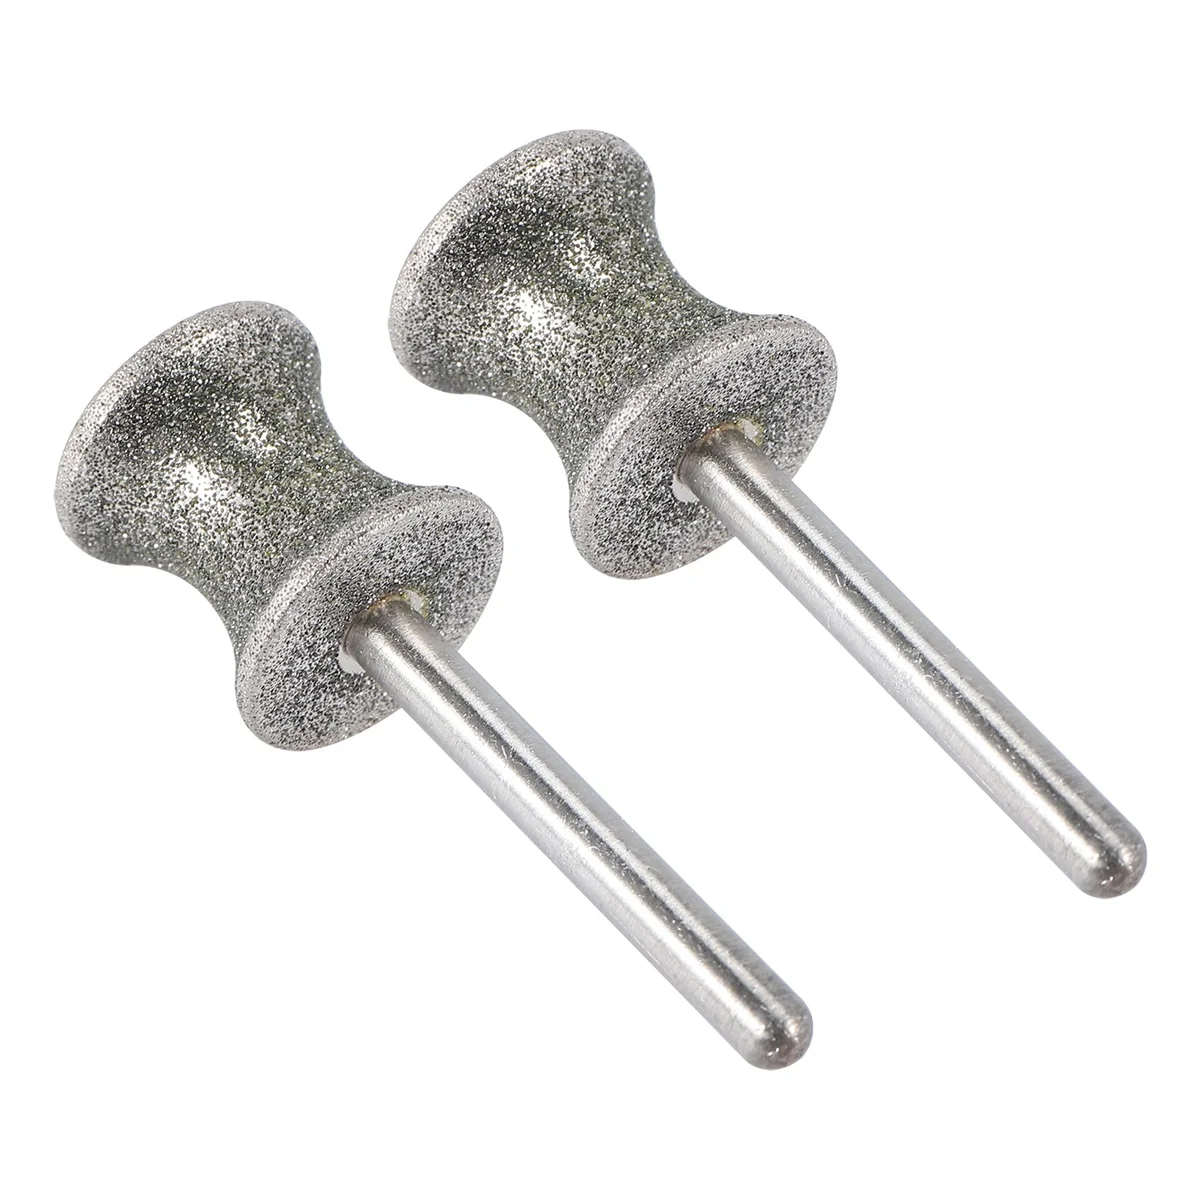 2 Pack Diamond Dog Nail Grinder Bits for Rotary Tool Fits for Dremel and Many Others